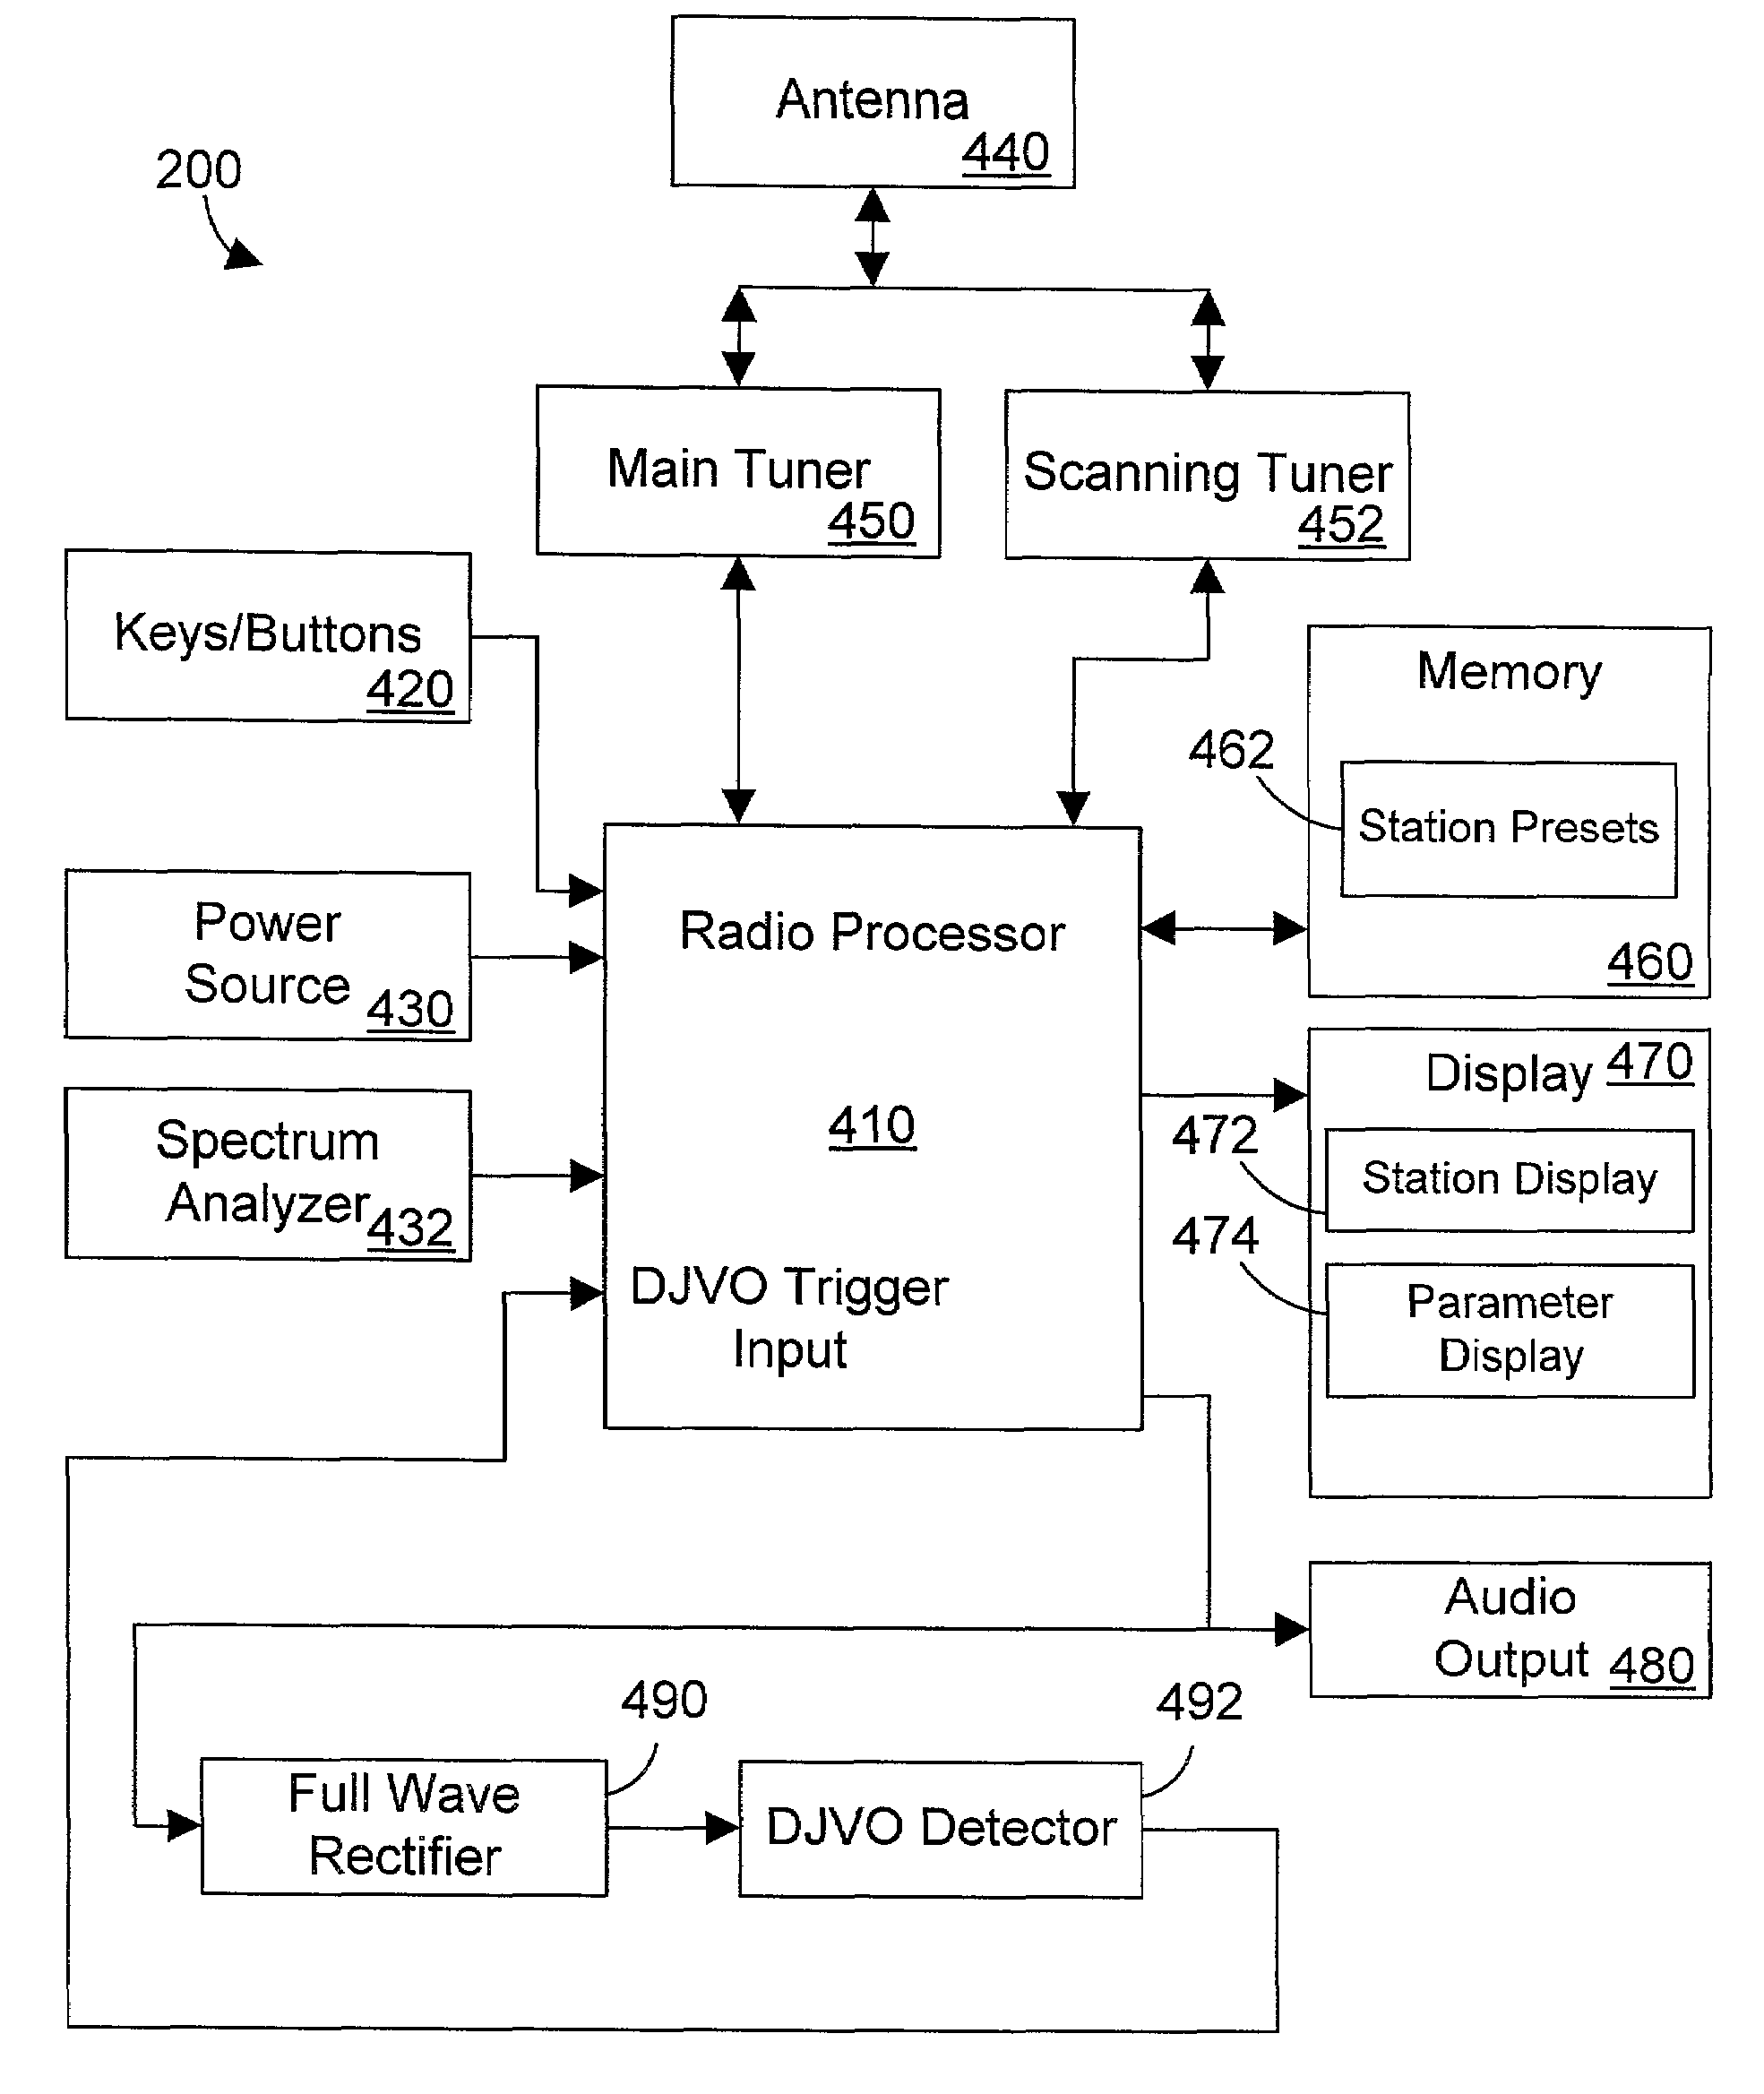 Radio receiver that changes function according to the output of an internal voice-only detector